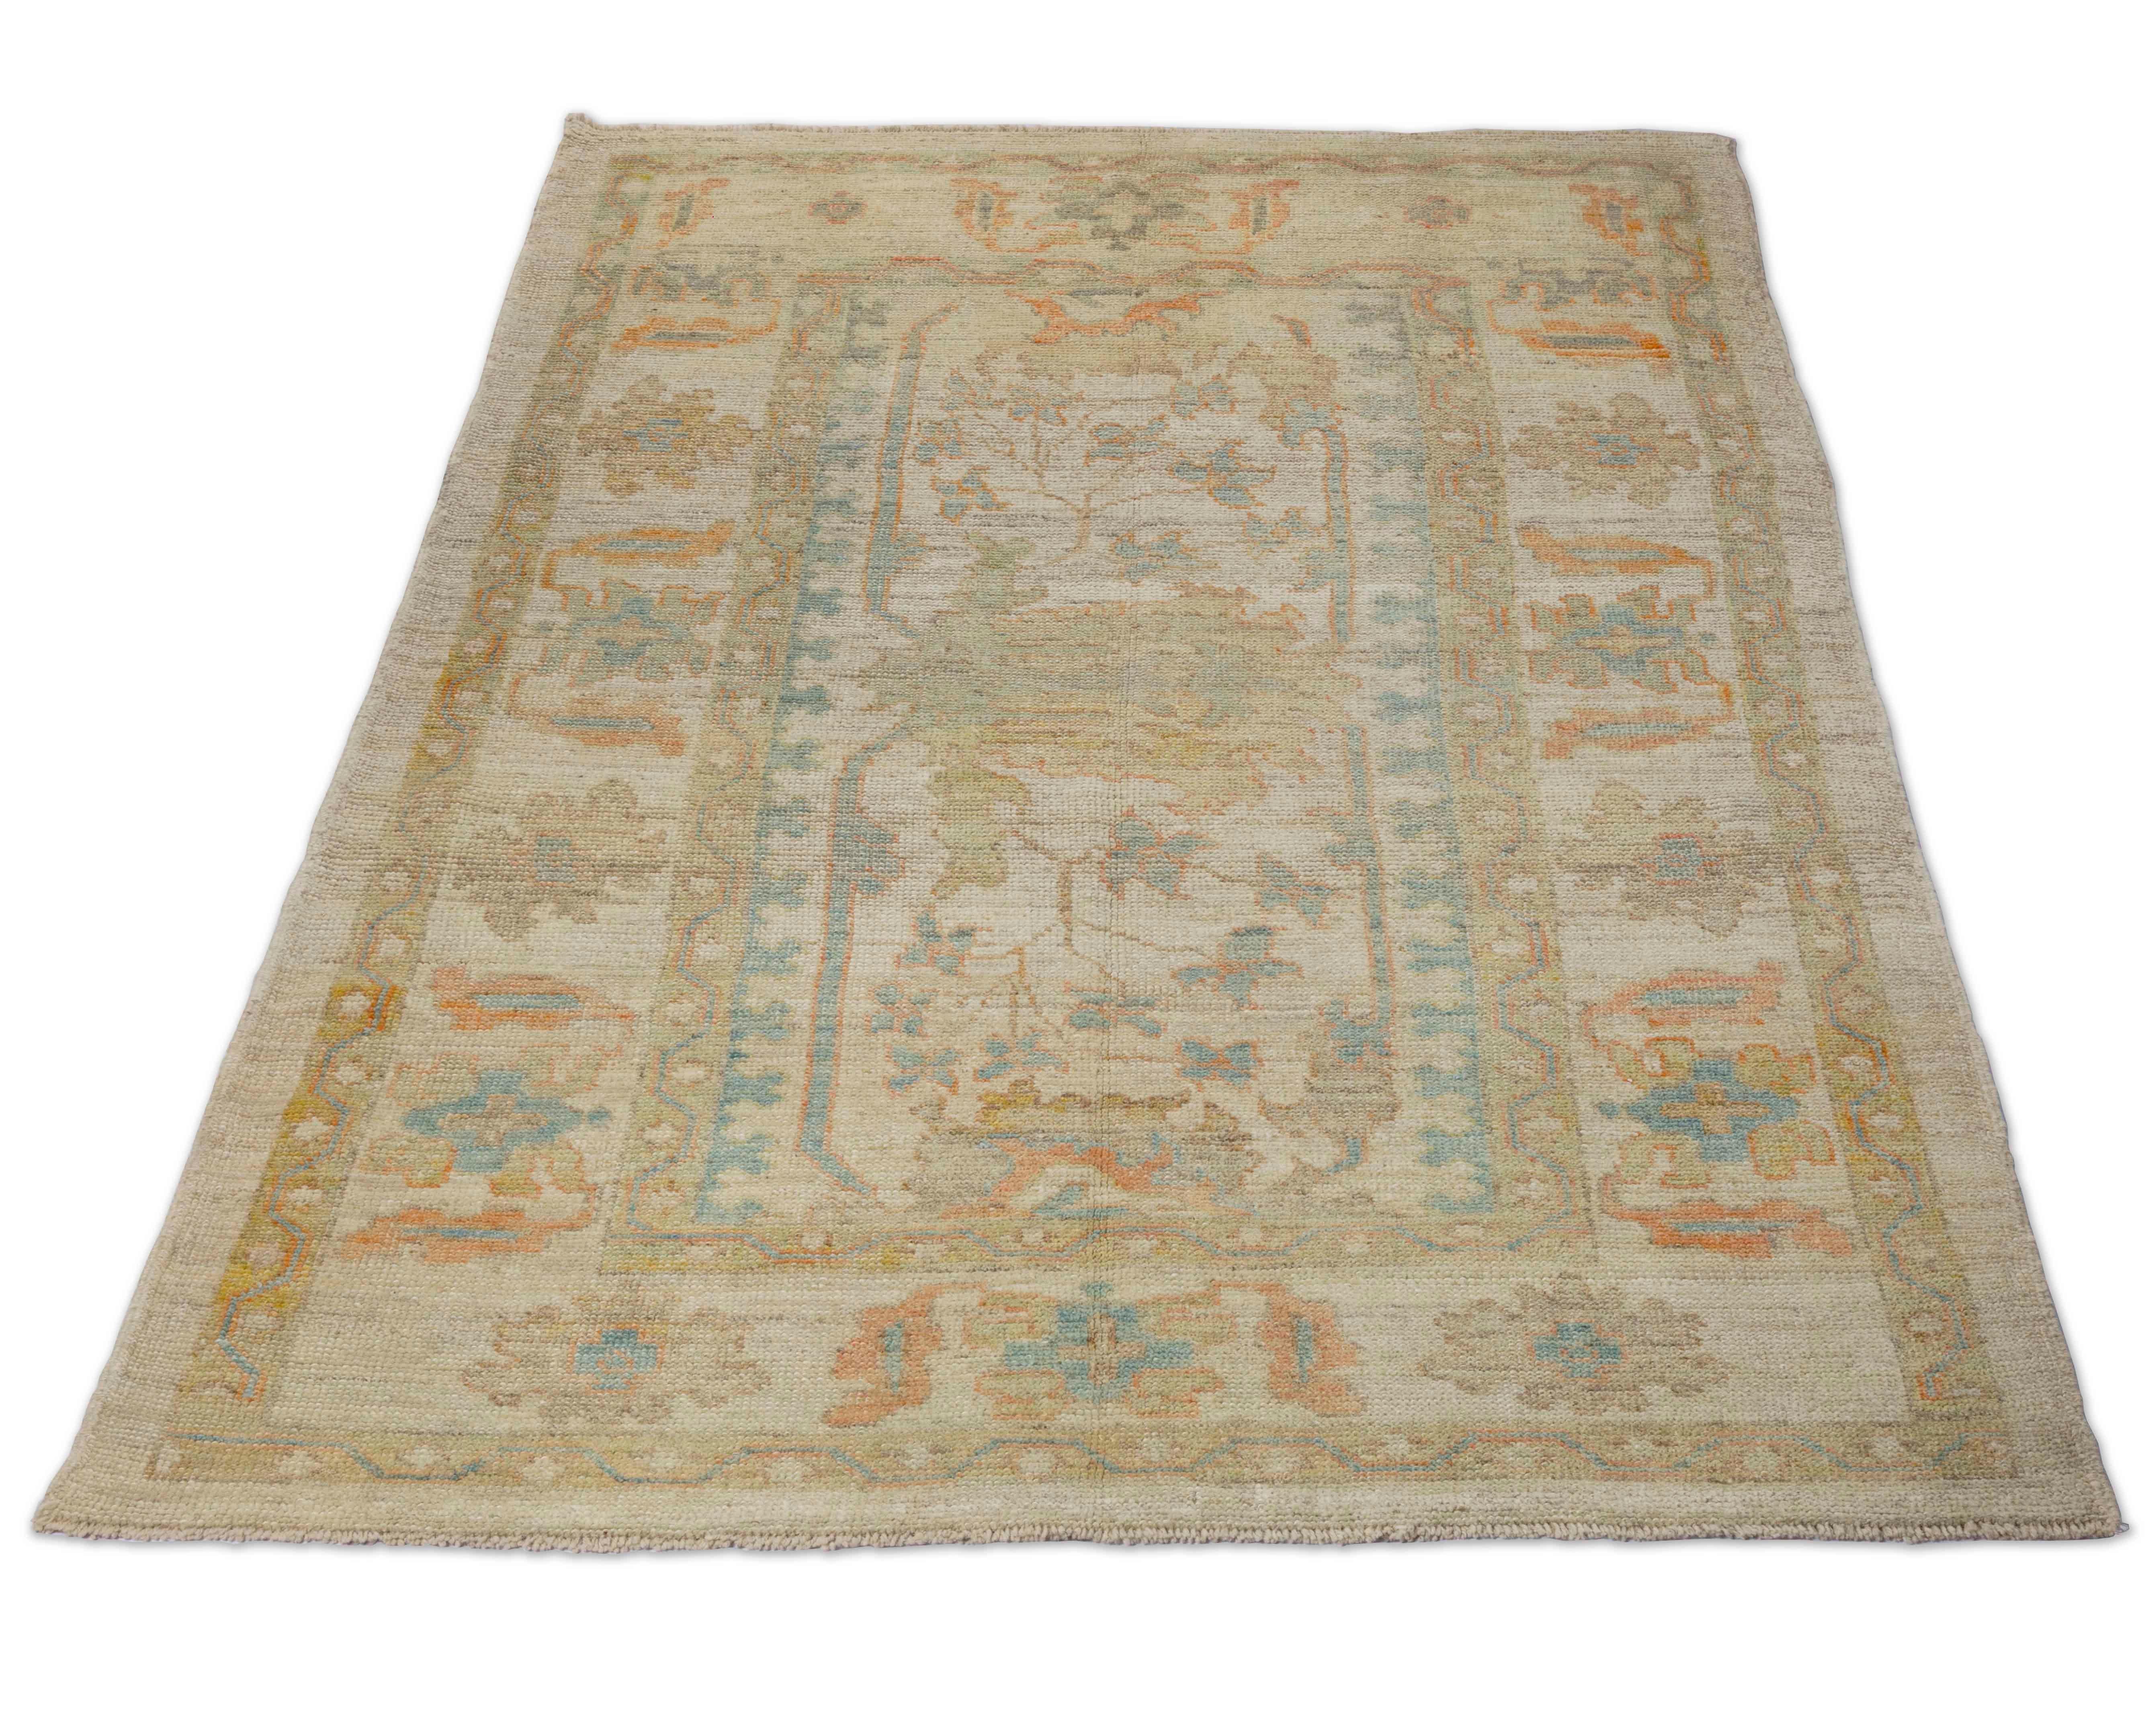 New Turkish rug made of handwoven sheep’s wool of the finest quality. It’s colored with organic vegetable dyes that are certified safe for humans and pets alike. It features a large, beige and gray field with flower details allover associated with